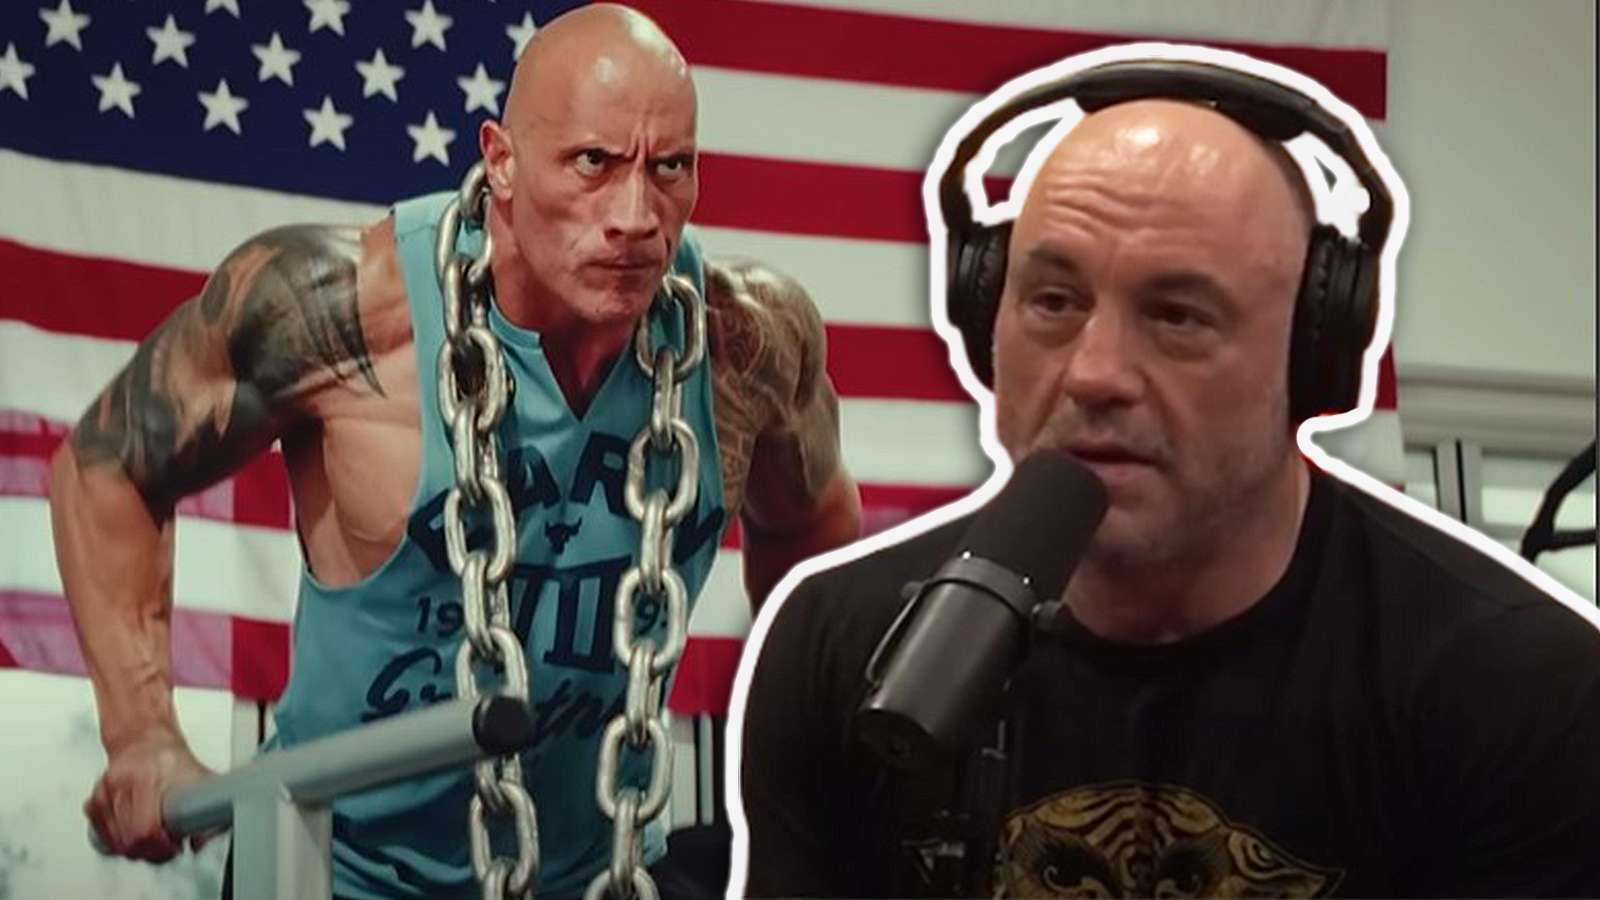 Joe Rogan accuses the rock of using steroids come clean